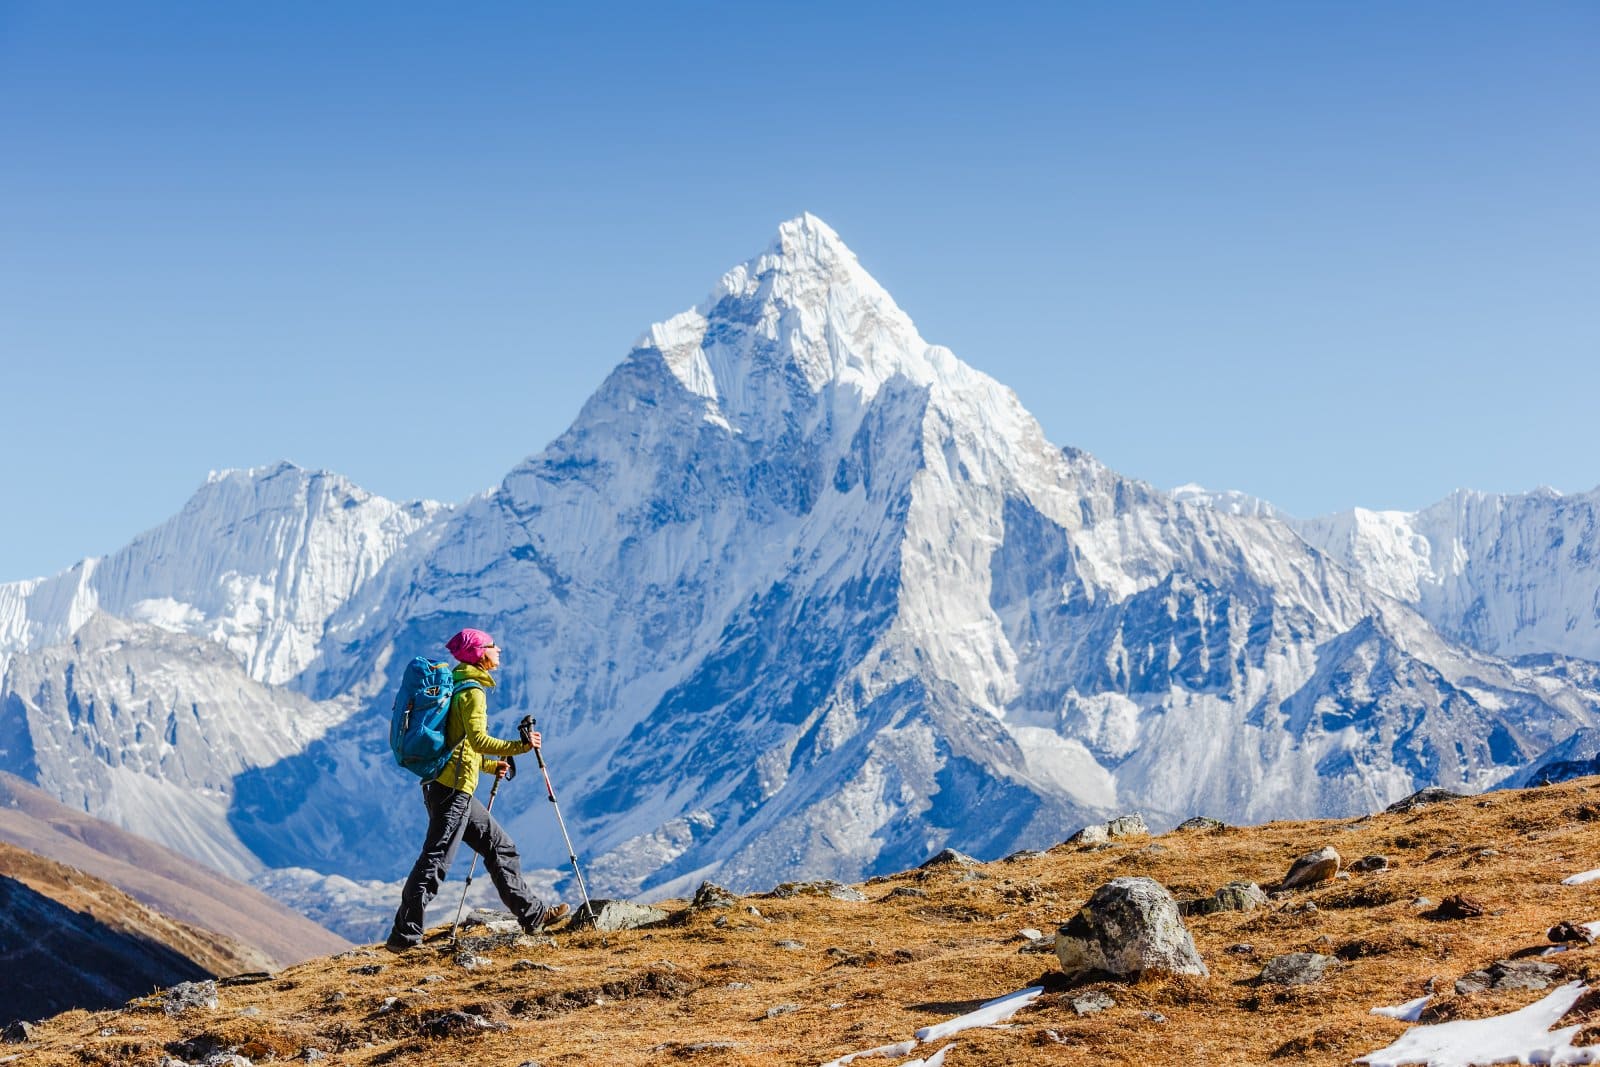 Image Credit: Shutterstock / Olga Danylenko <p>High-risk activities like mountaineering in the Himalayas or diving in remote parts of the Pacific need thorough preparation and expert guidance. Always use reputable companies and check equipment before activities.</p>